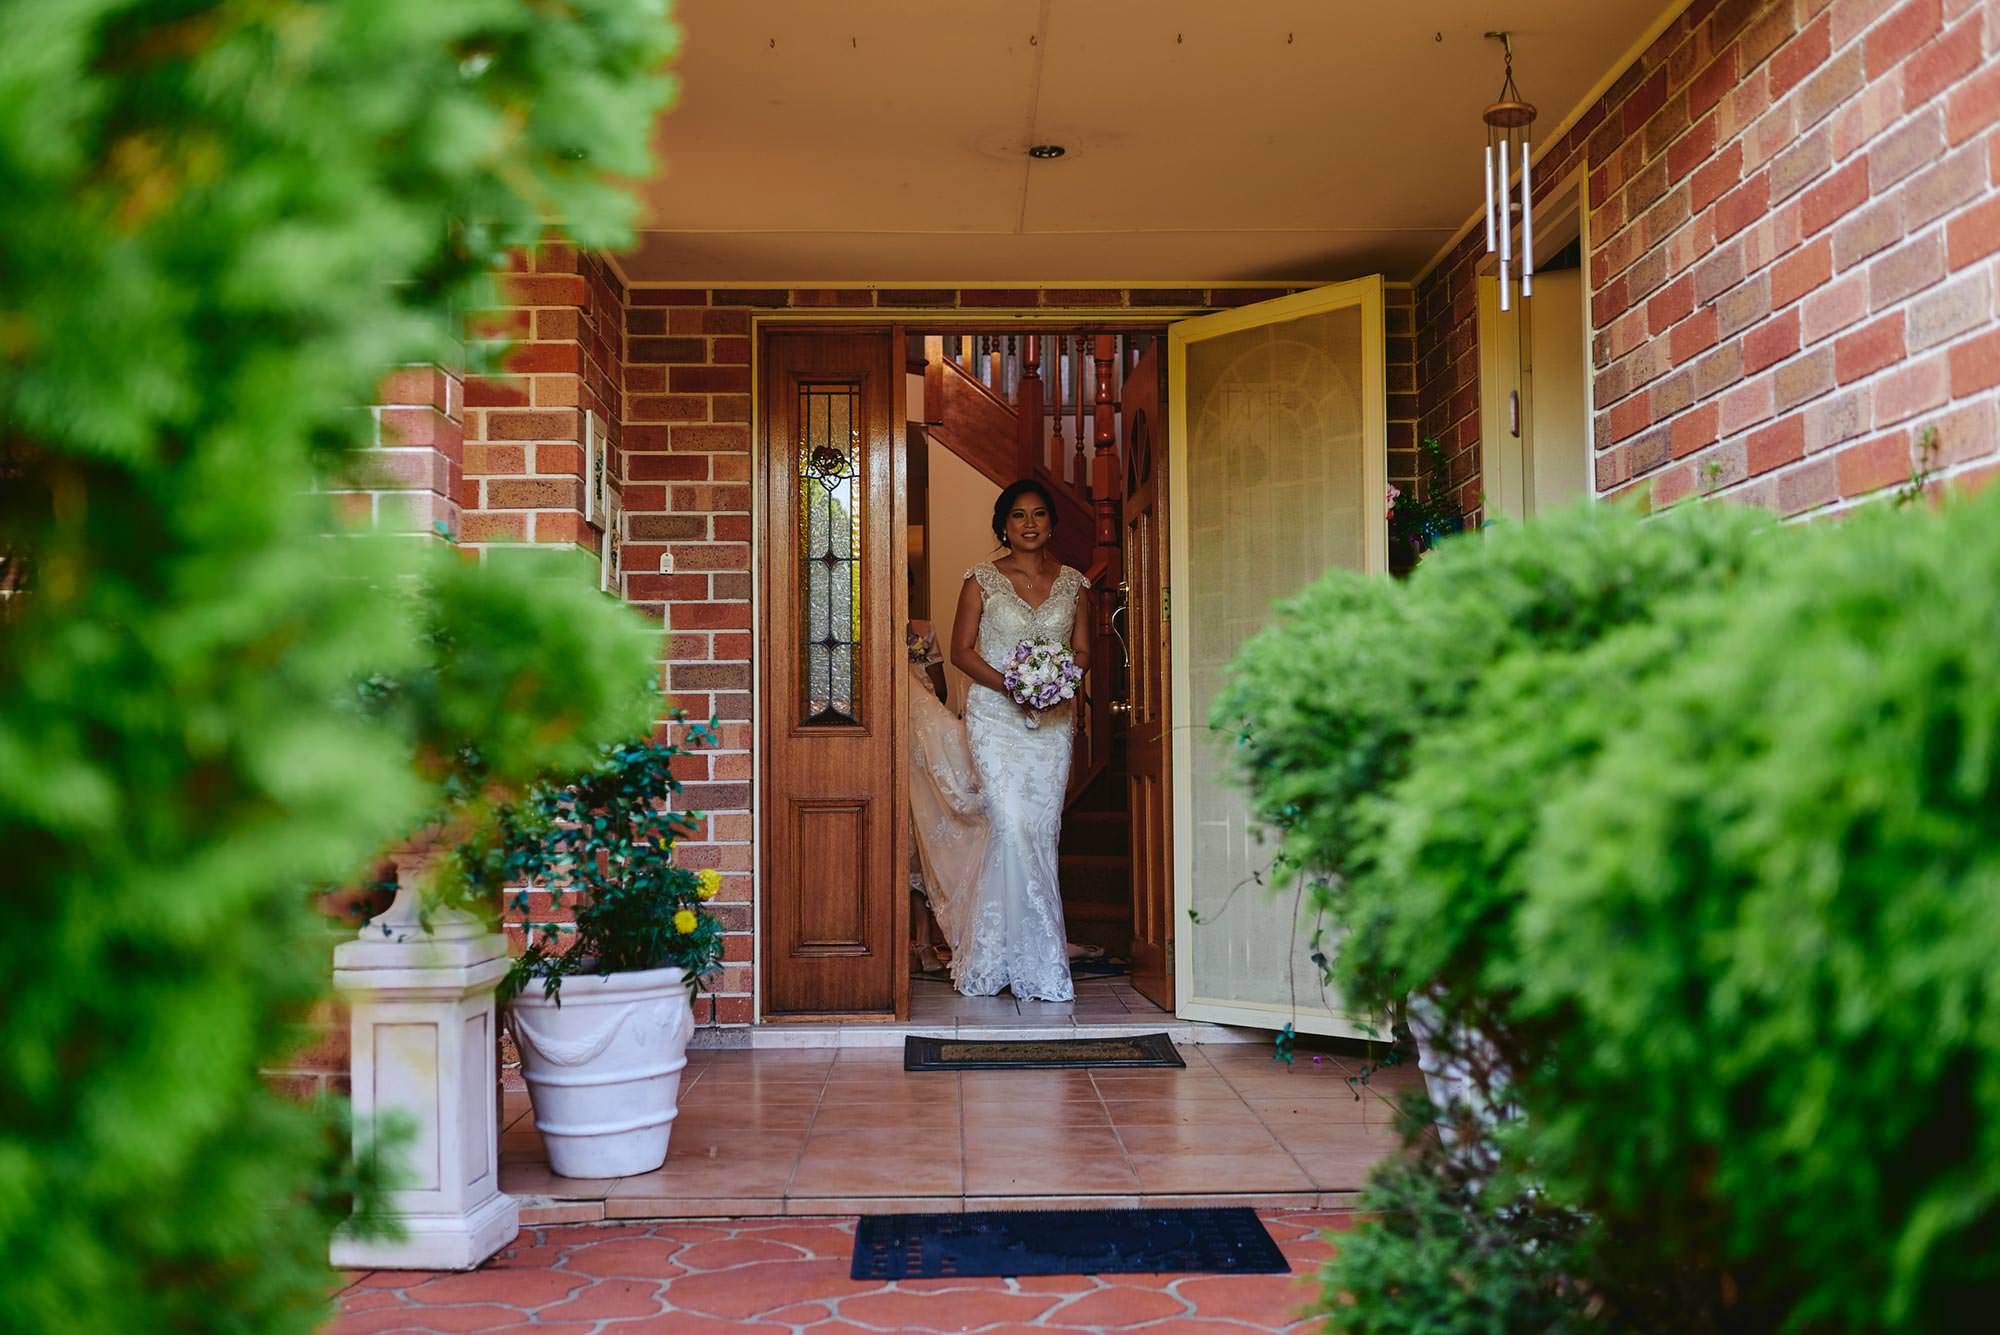 Bride about to leave home for wedding ceremony